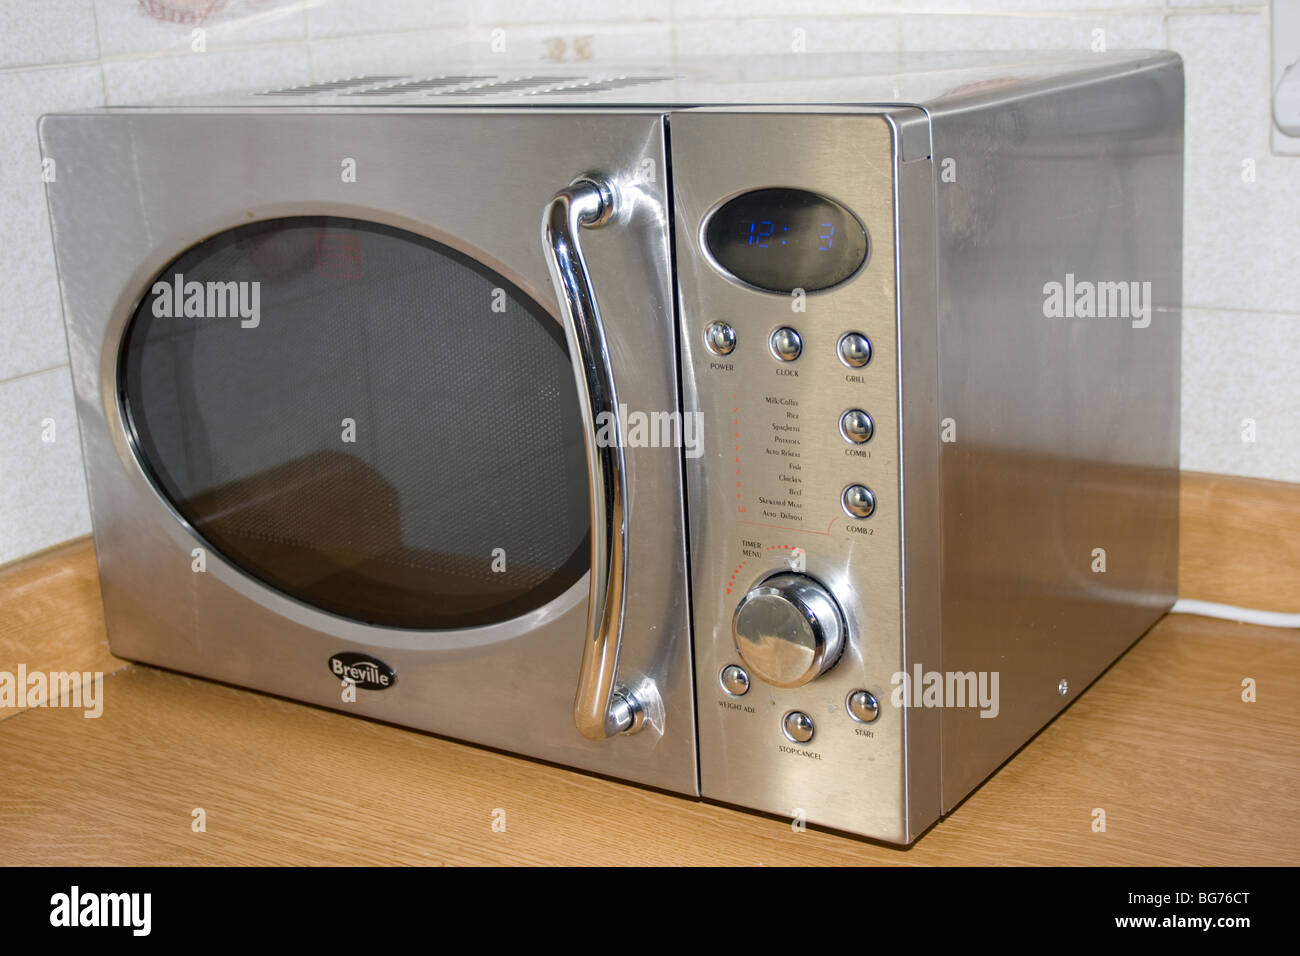 Electric microwave oven Stock Photo